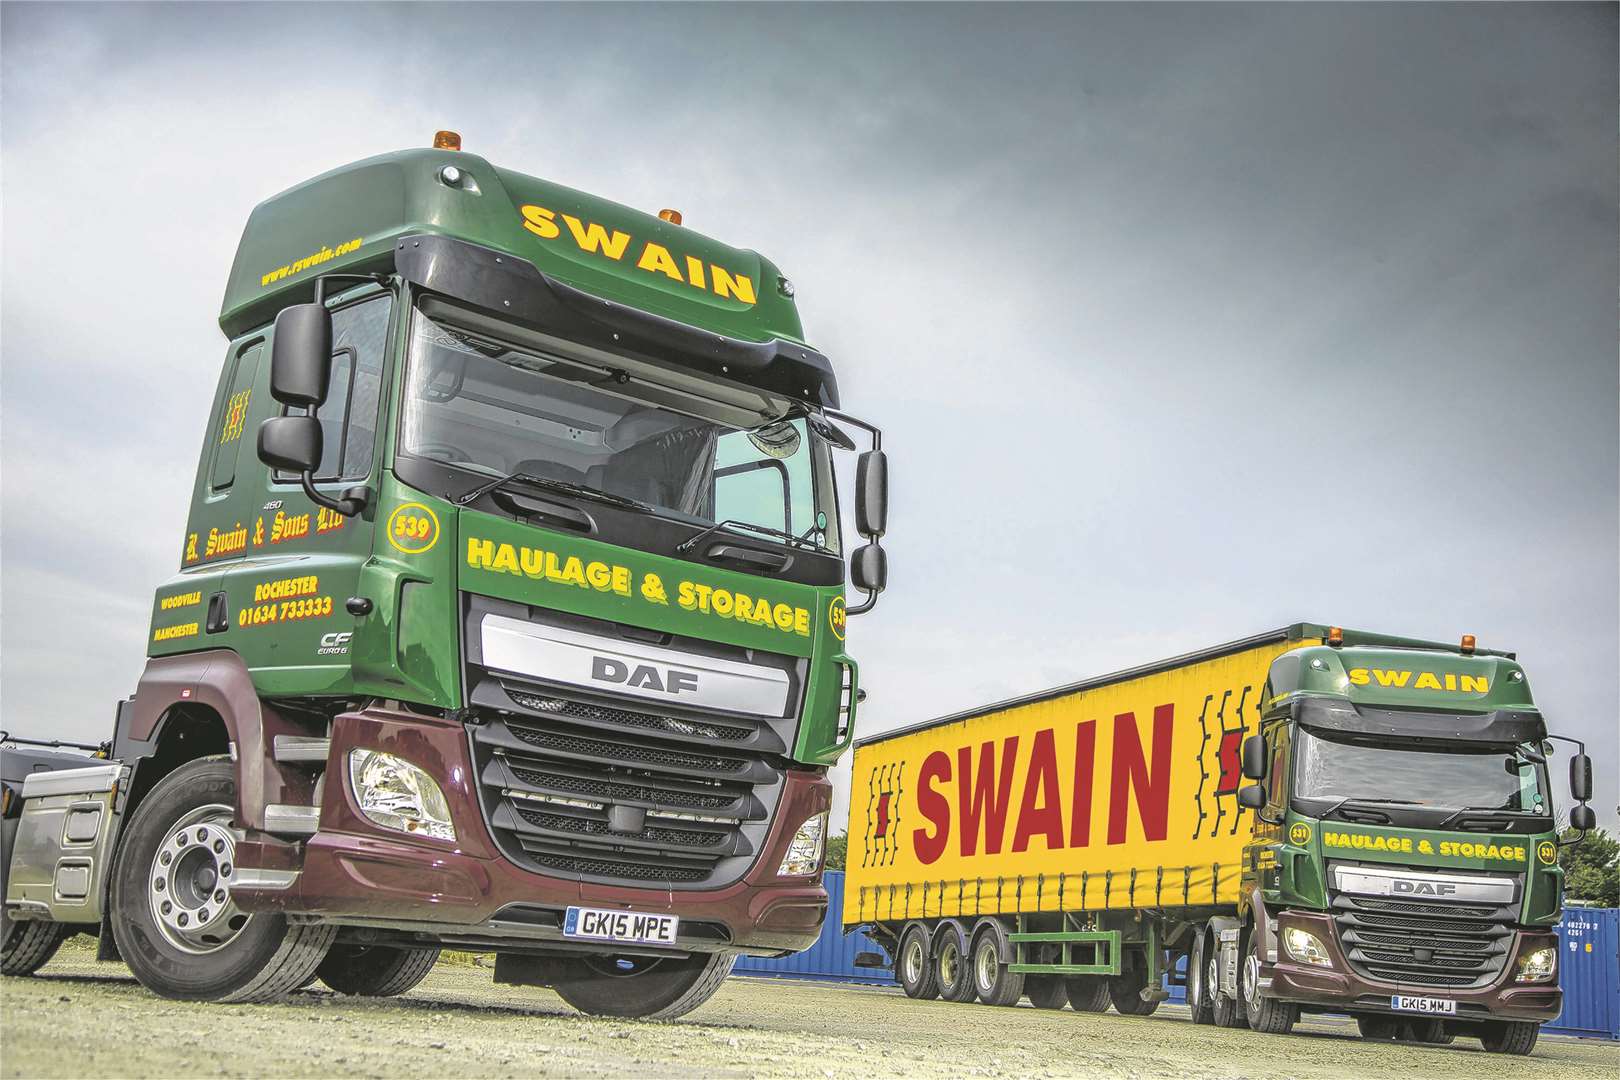 The Swain Group has more than 450 vehicles